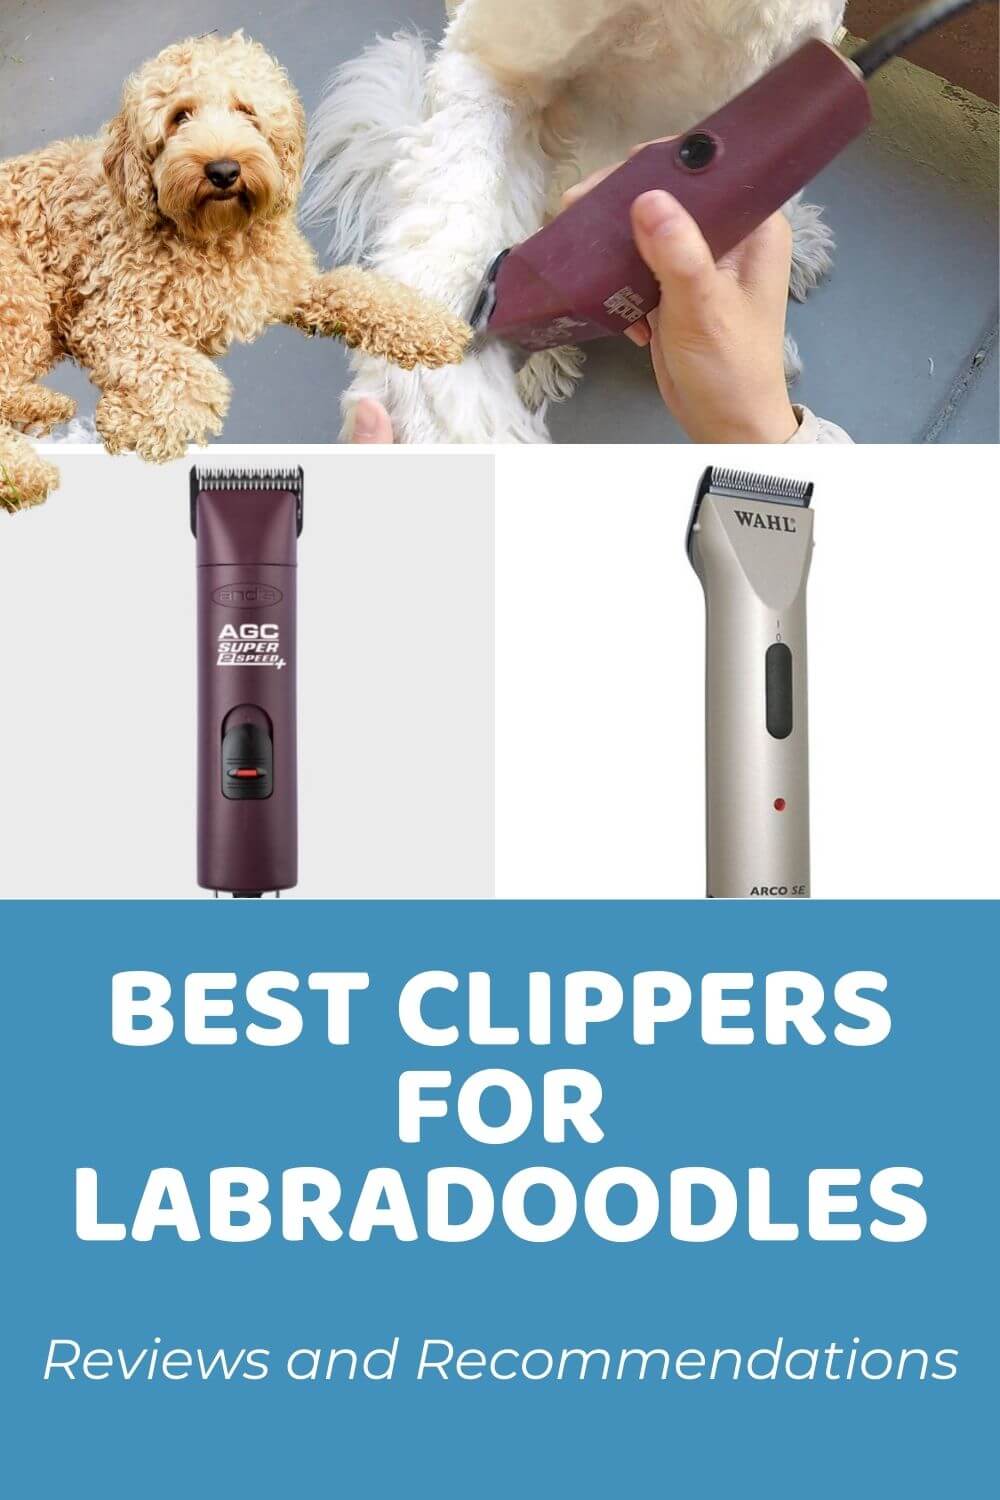 Best Clippers for Labradoodles: Reviews and Recommendations